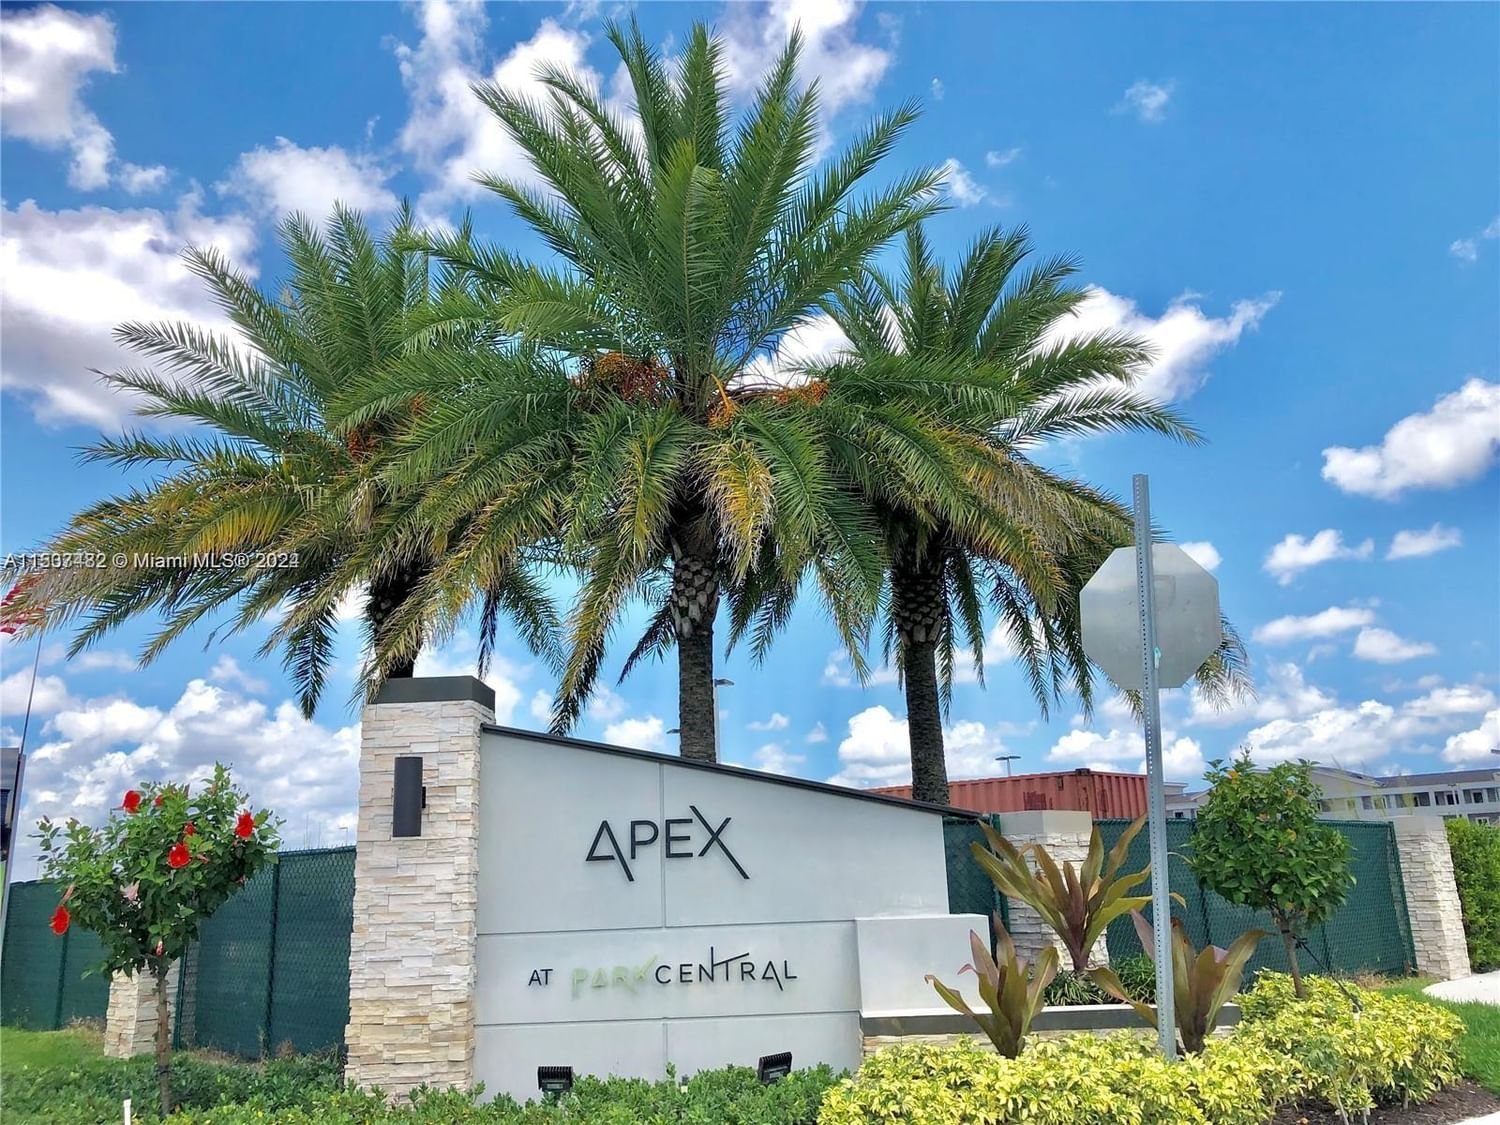 Real estate property located at 7825 104th Ave #32, Miami-Dade County, APEX AT PARK CENTRAL COND, Doral, FL